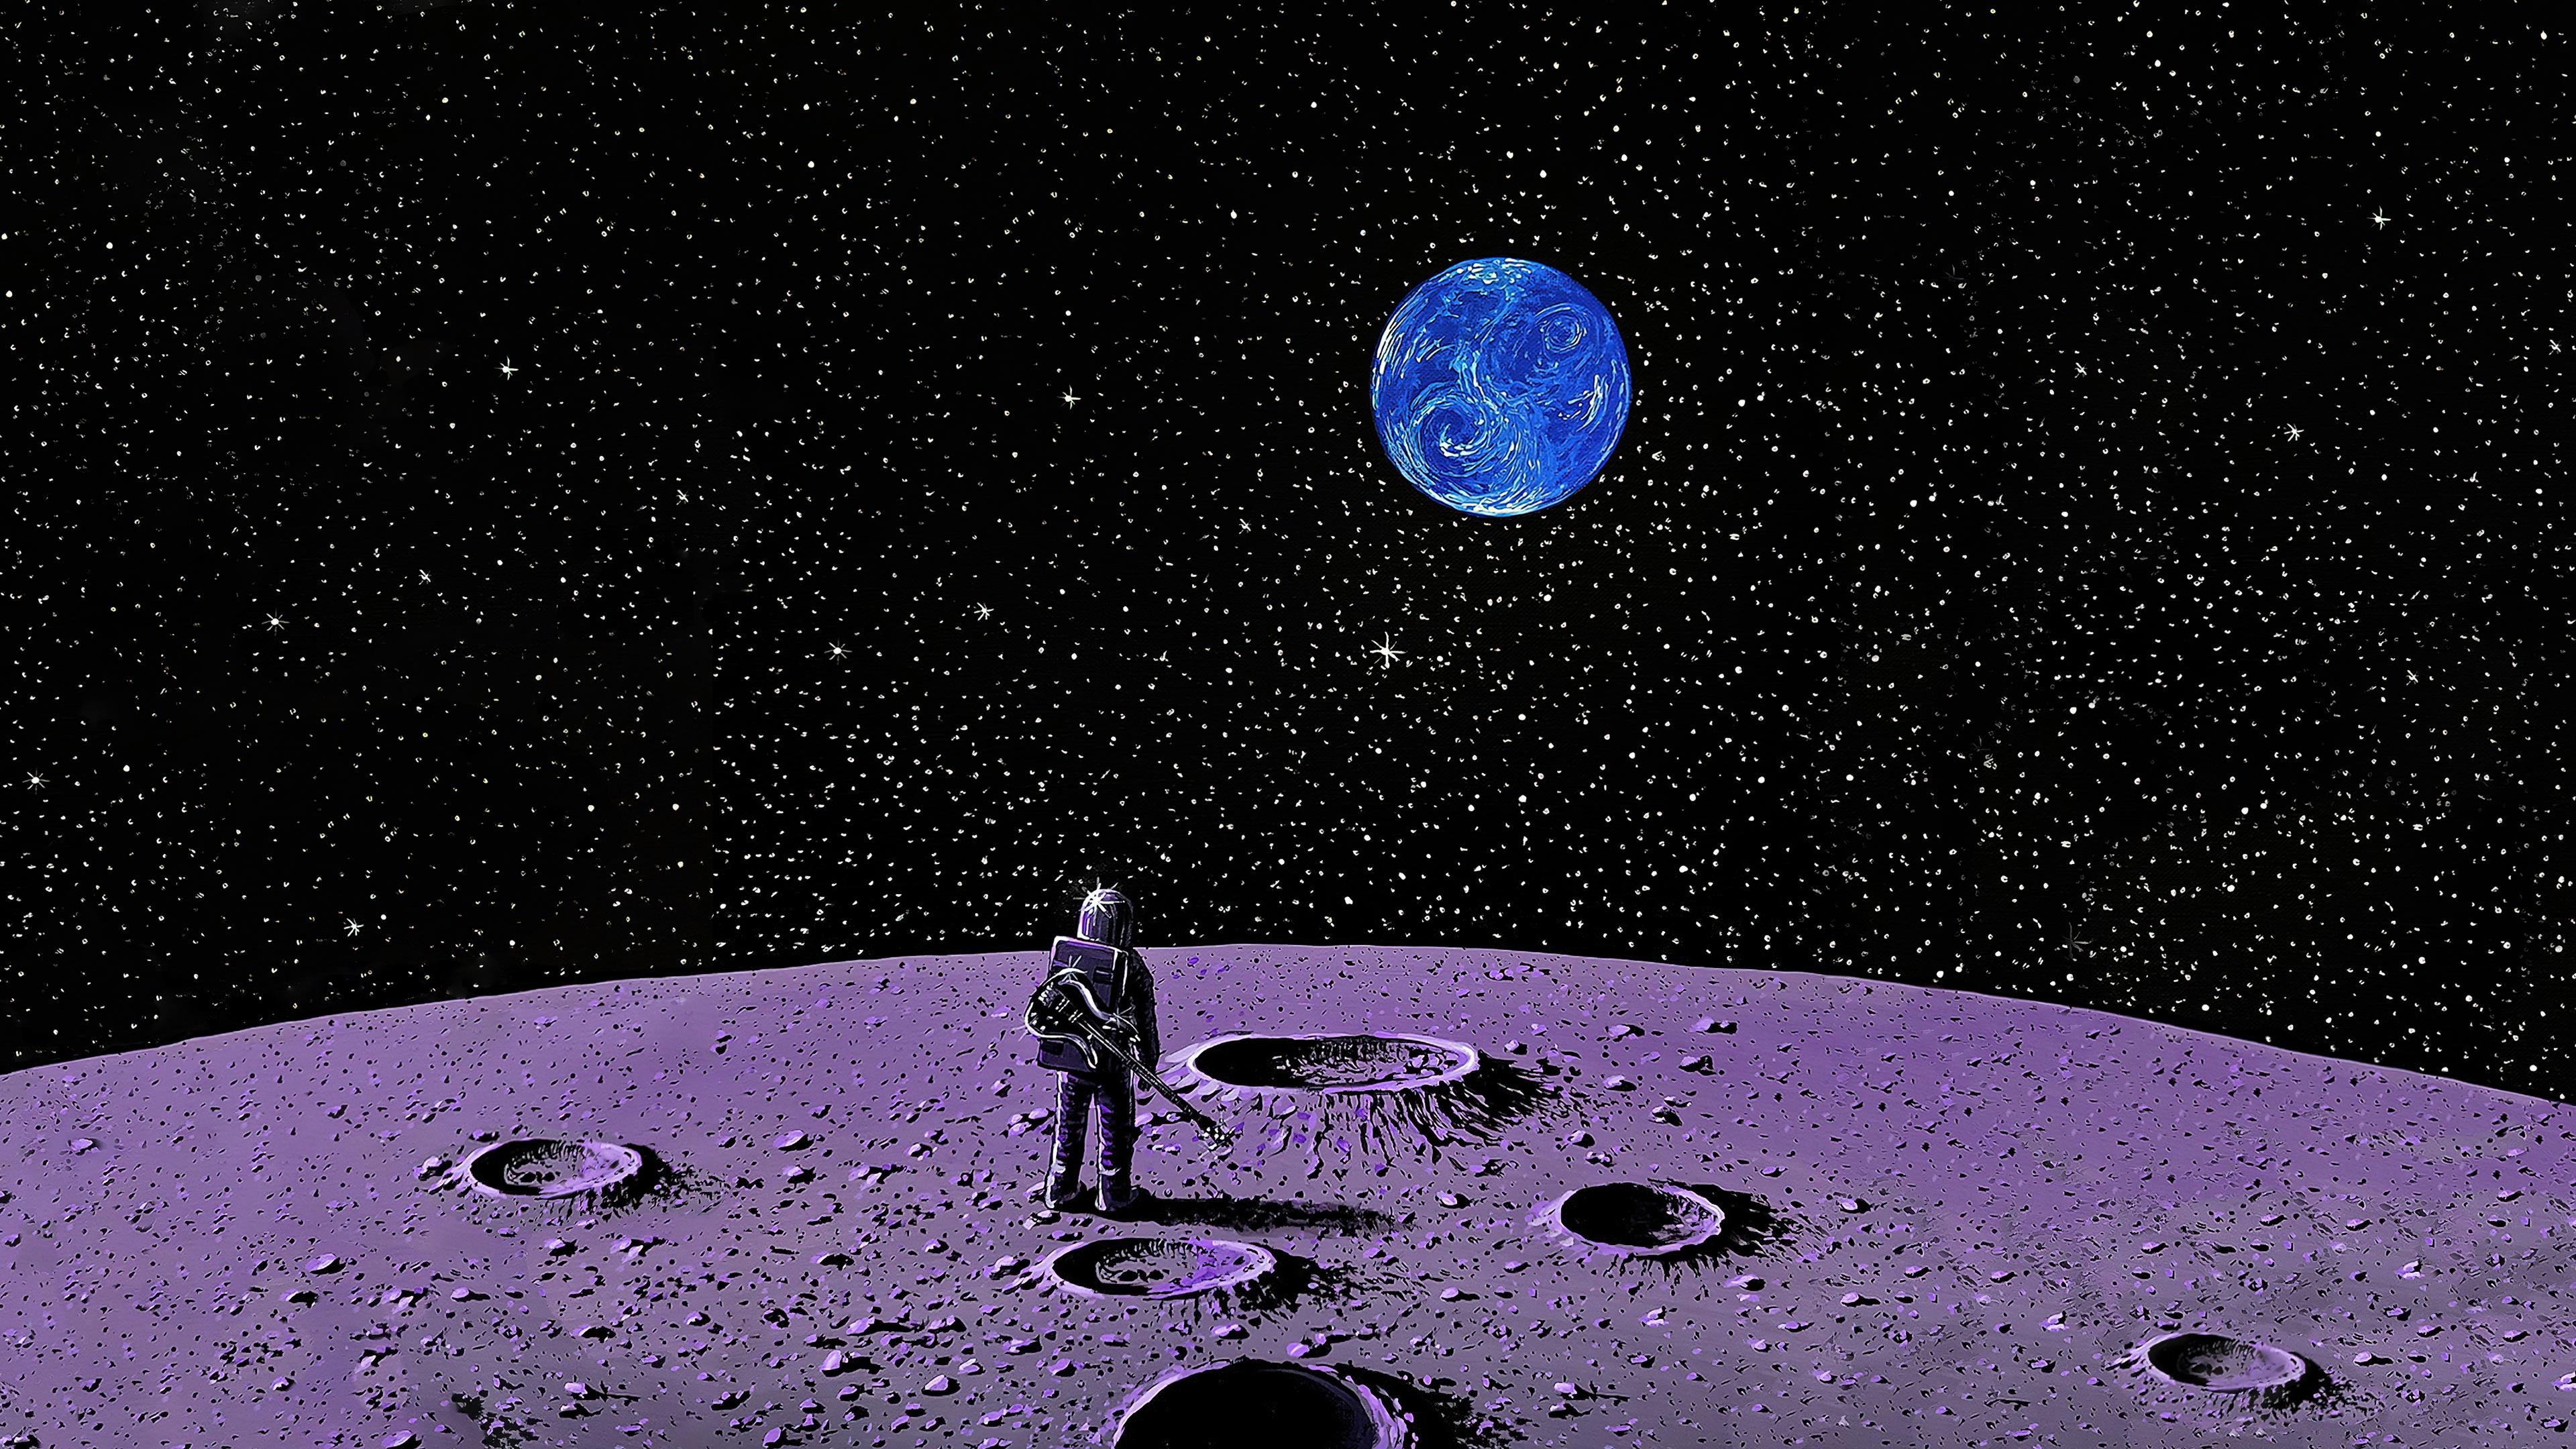 Wallpaper Astronaut in another planet